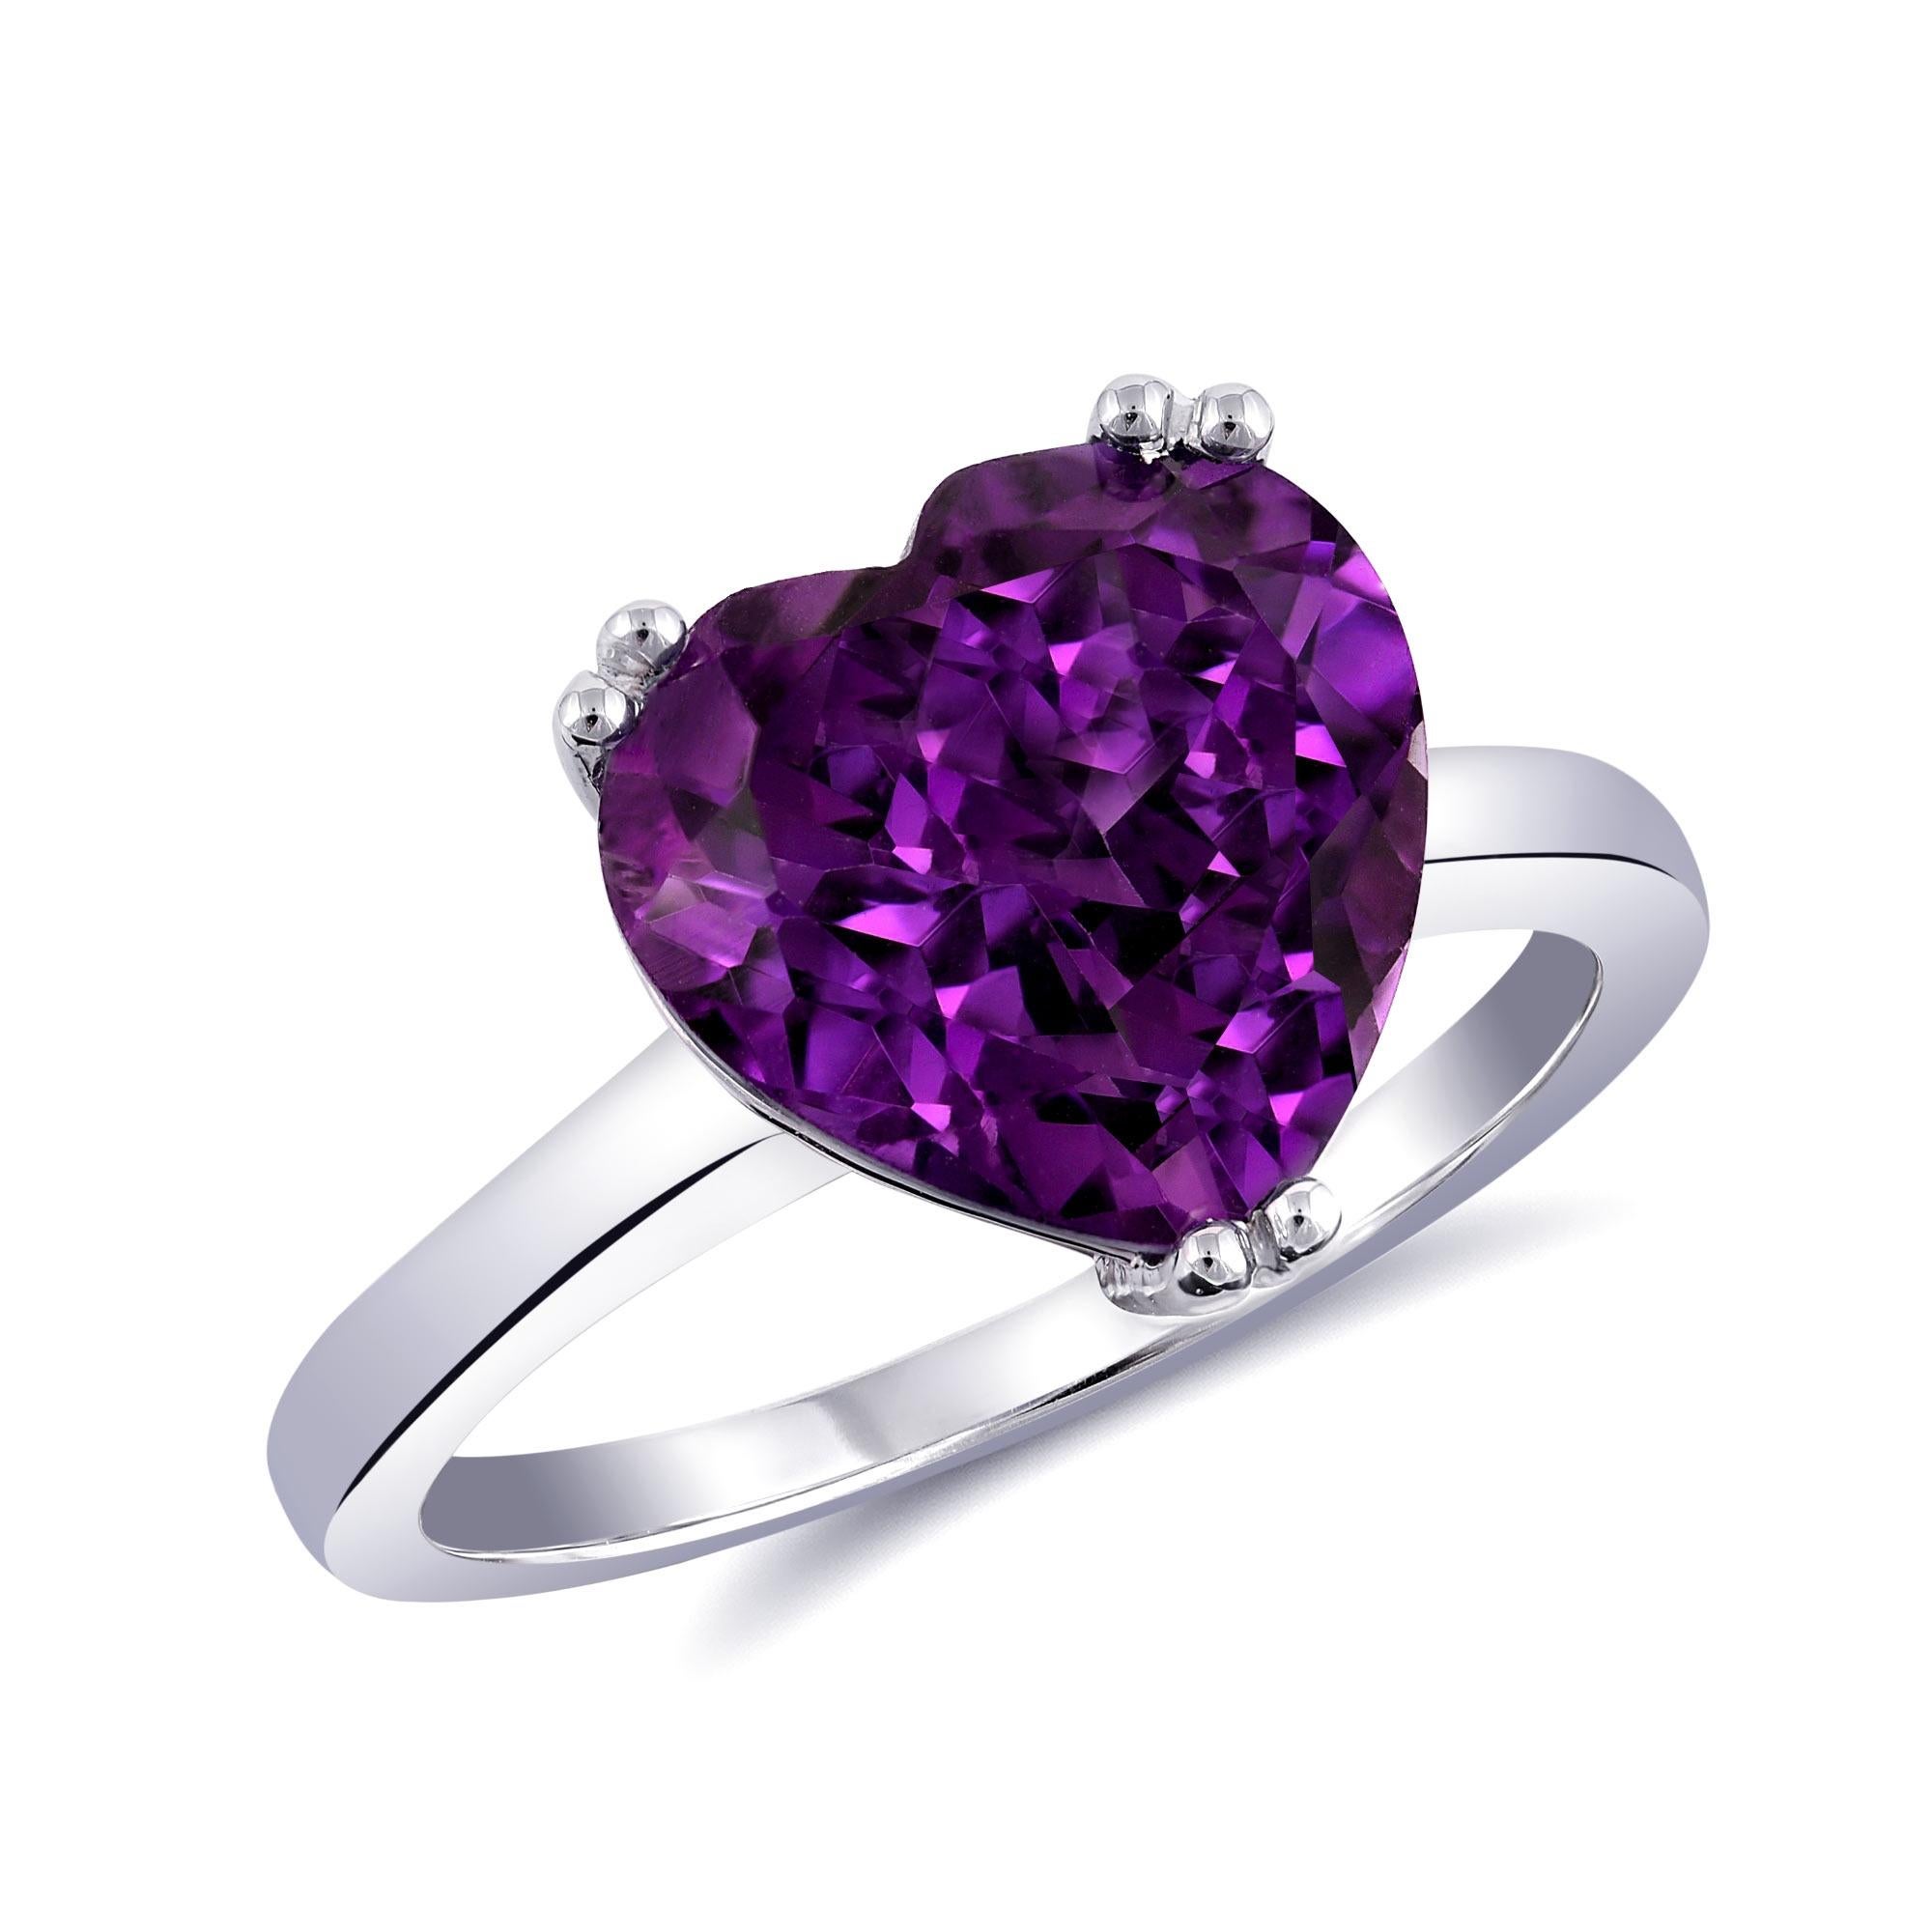 4.01 Carats Amethyst set in 14K White Gold Ring In New Condition For Sale In Los Angeles, CA